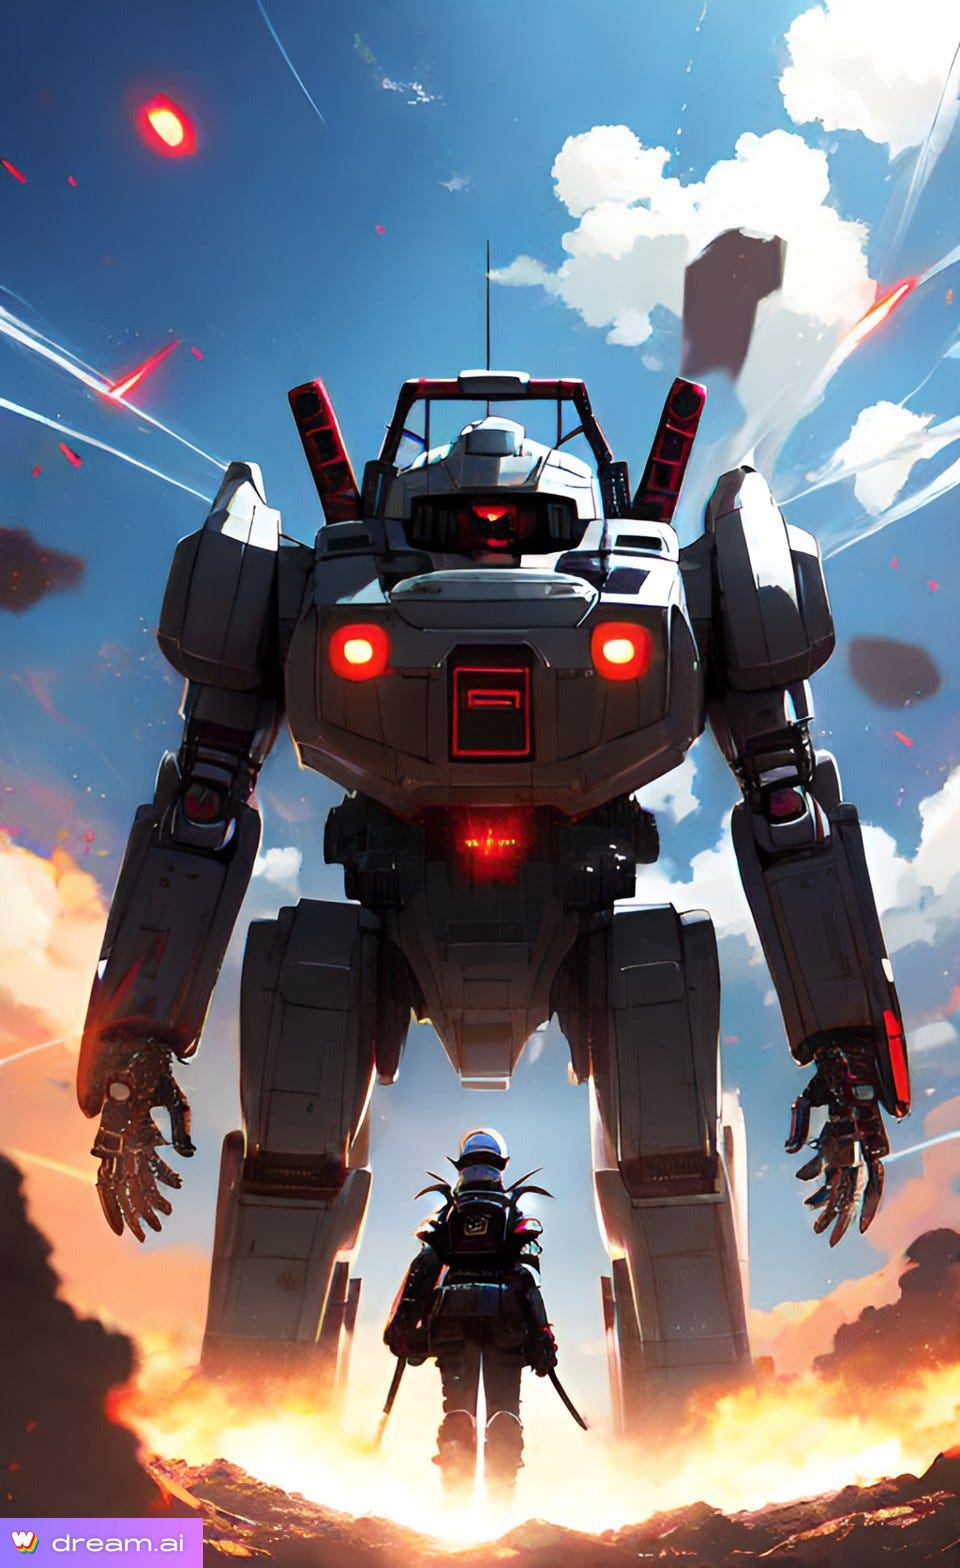 anime-style image of a small figure in a rocket suit before an enormous killer robot